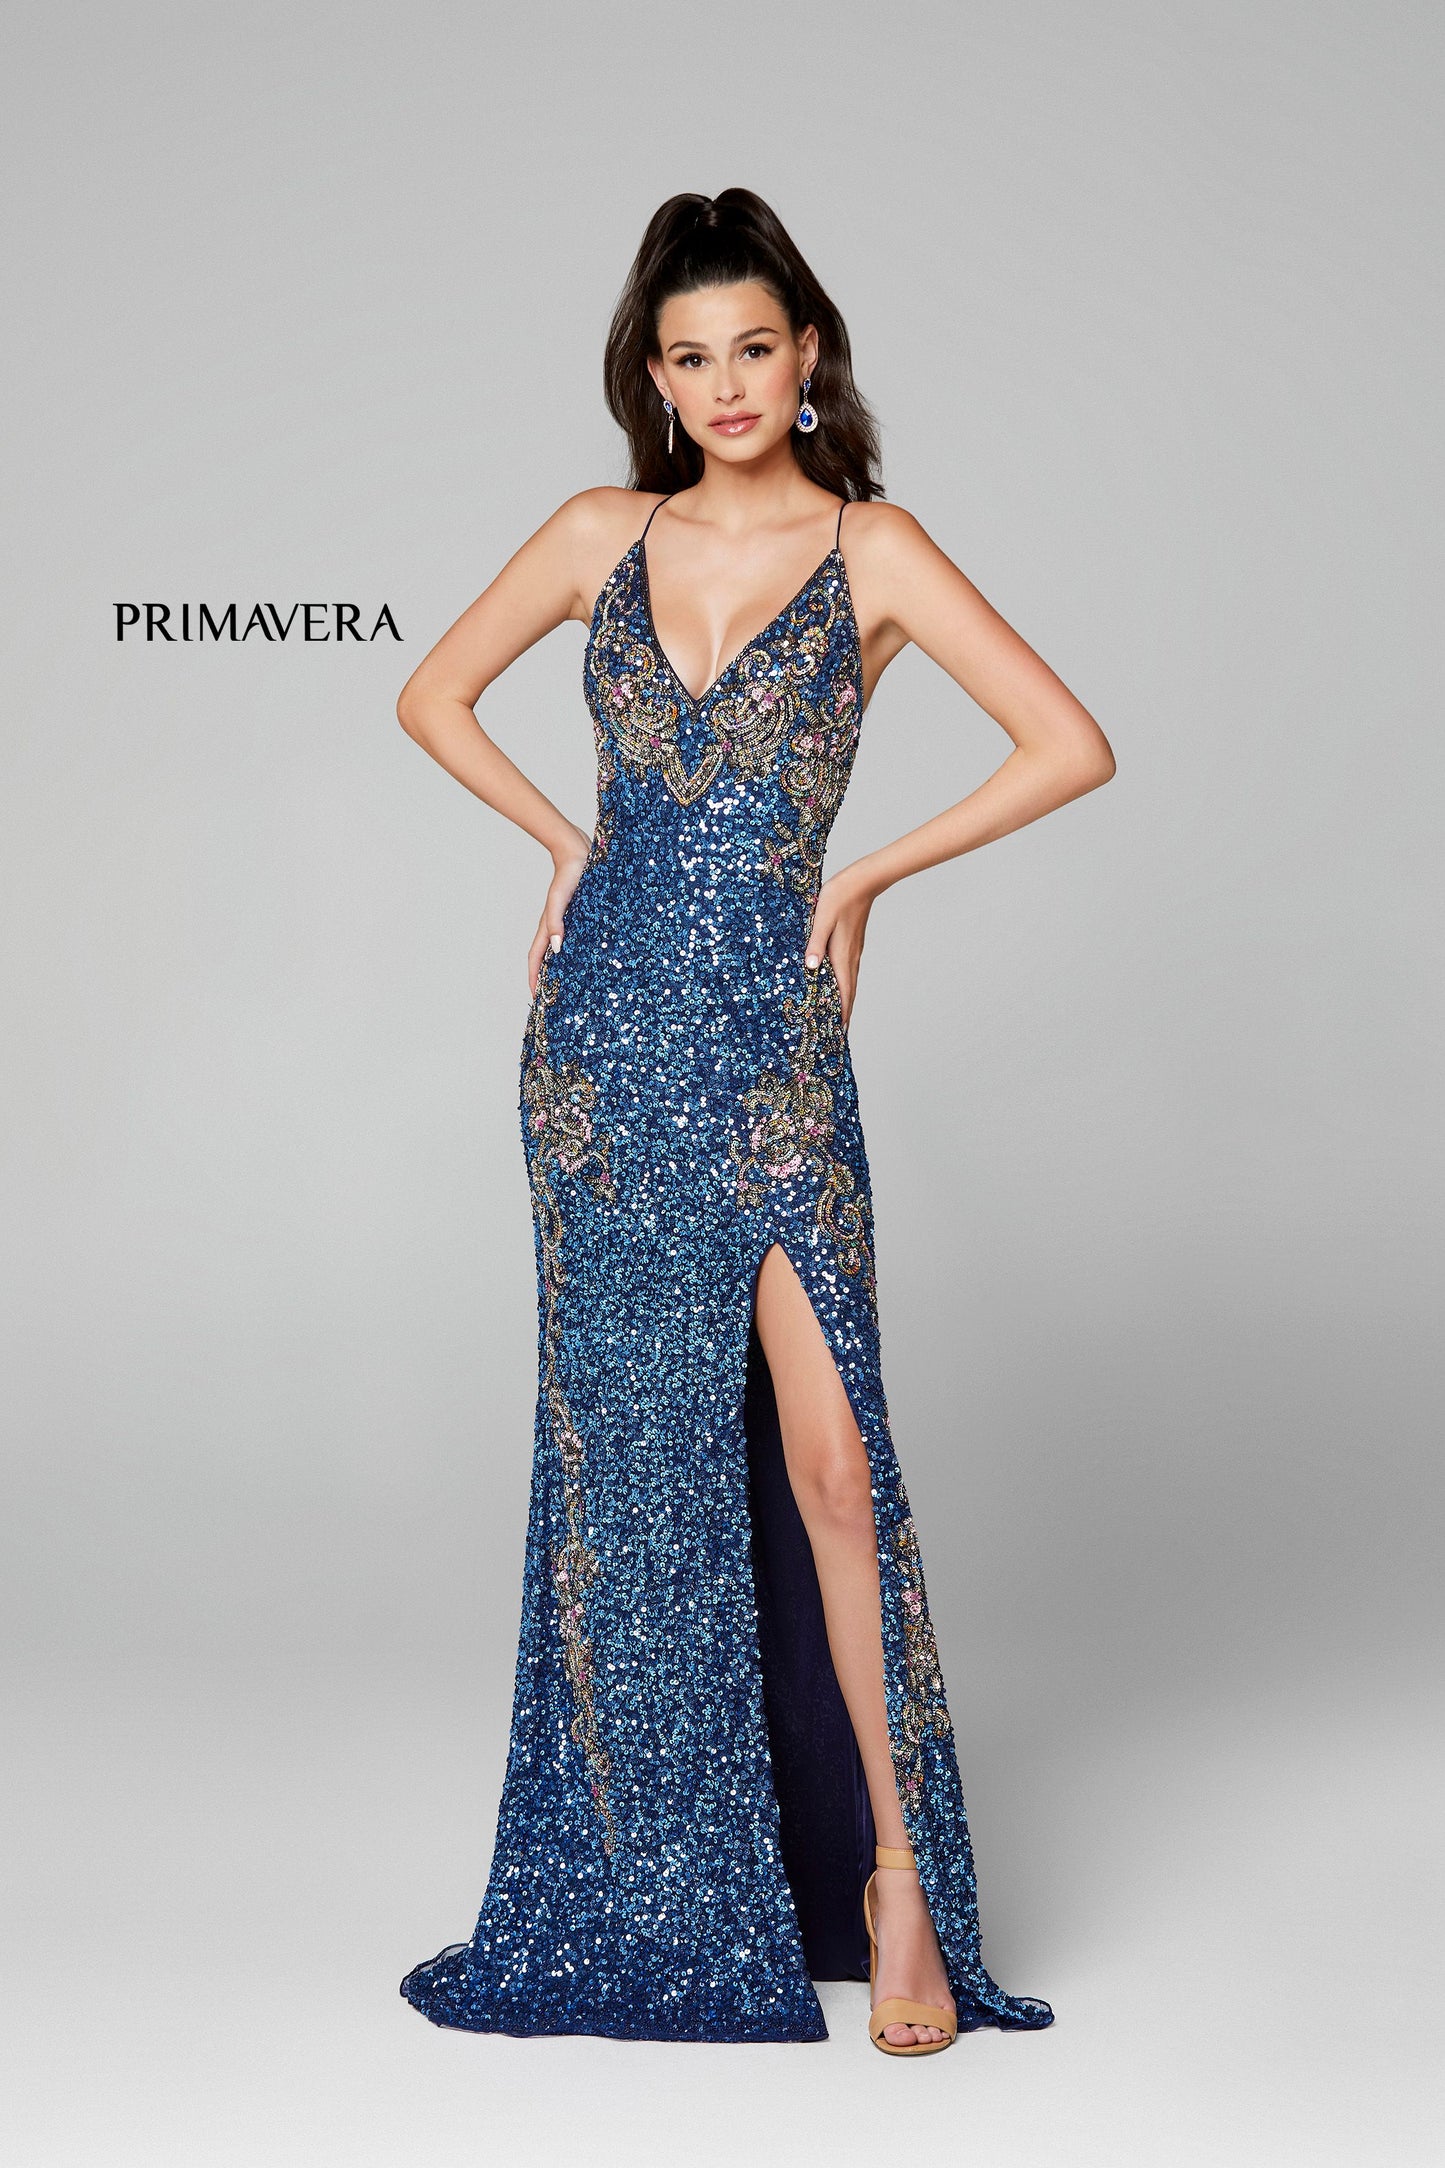 Primavera Couture 3211 is a Long fitted sequin Embellished Formal Evening Gown. This Prom Dress Features a deep V Neck with an open Corset lace up back. Beaded & embellished elegant scroll pattern accentuate curves. Fully beaded prom dress with floral pattern and side slit. Long Sequin Gown featuring a v neckline. slit in the fitted skirt, Slit in Thigh. Stunning Pageant Dress, Prom Gown & More!